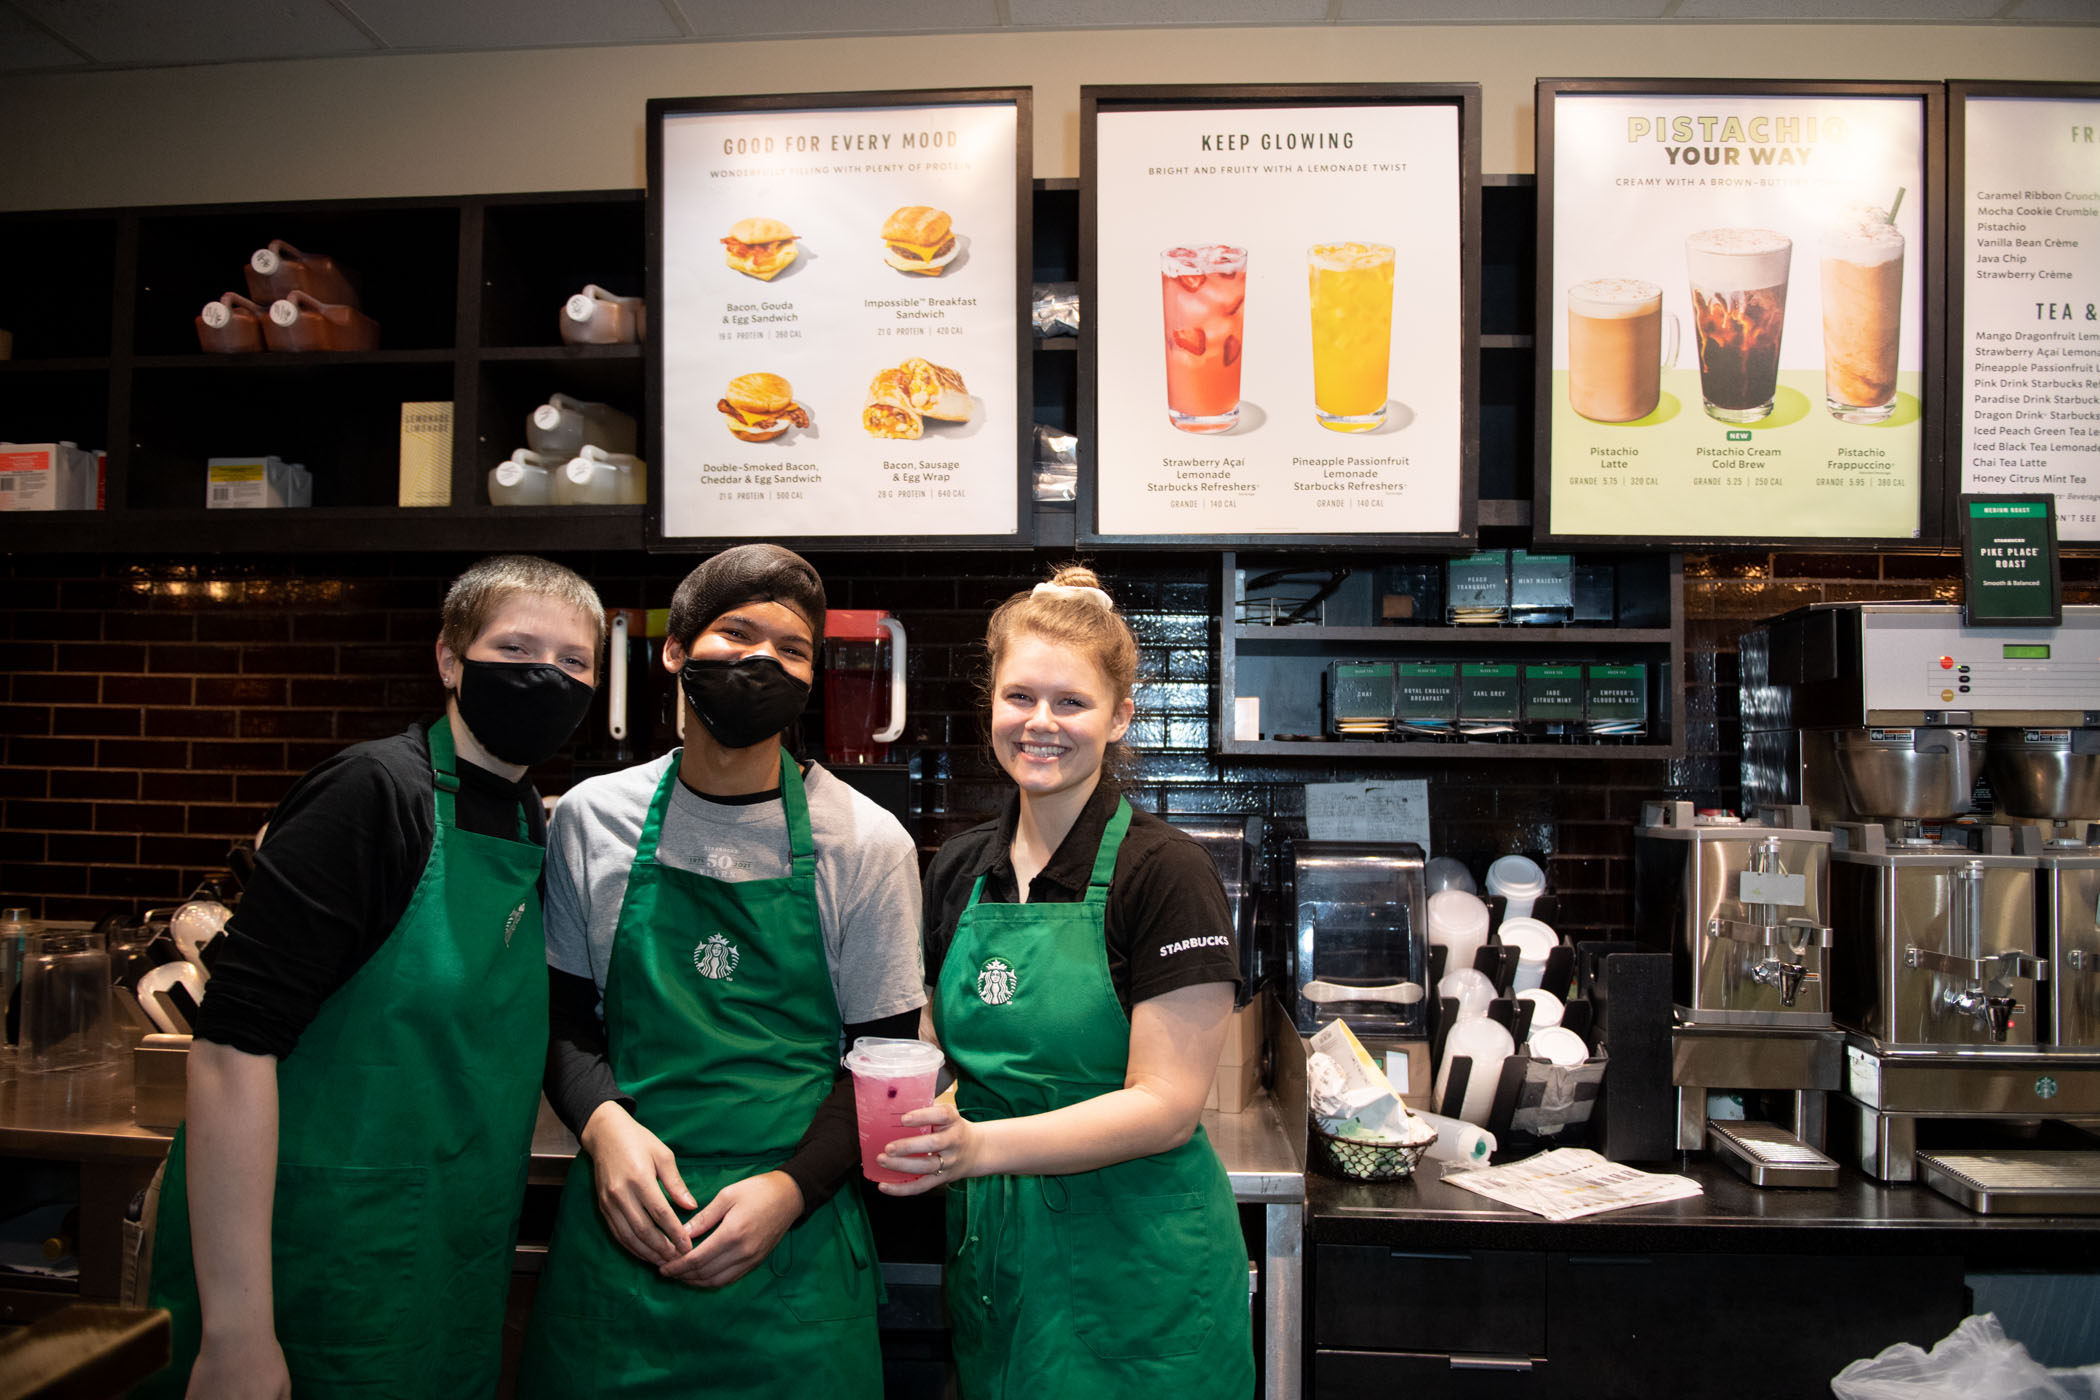 Staff of MSU&#039;s Starbucks, located inside Colvard Student Union, smile for the camera while showing off one of many drink options on the menu.